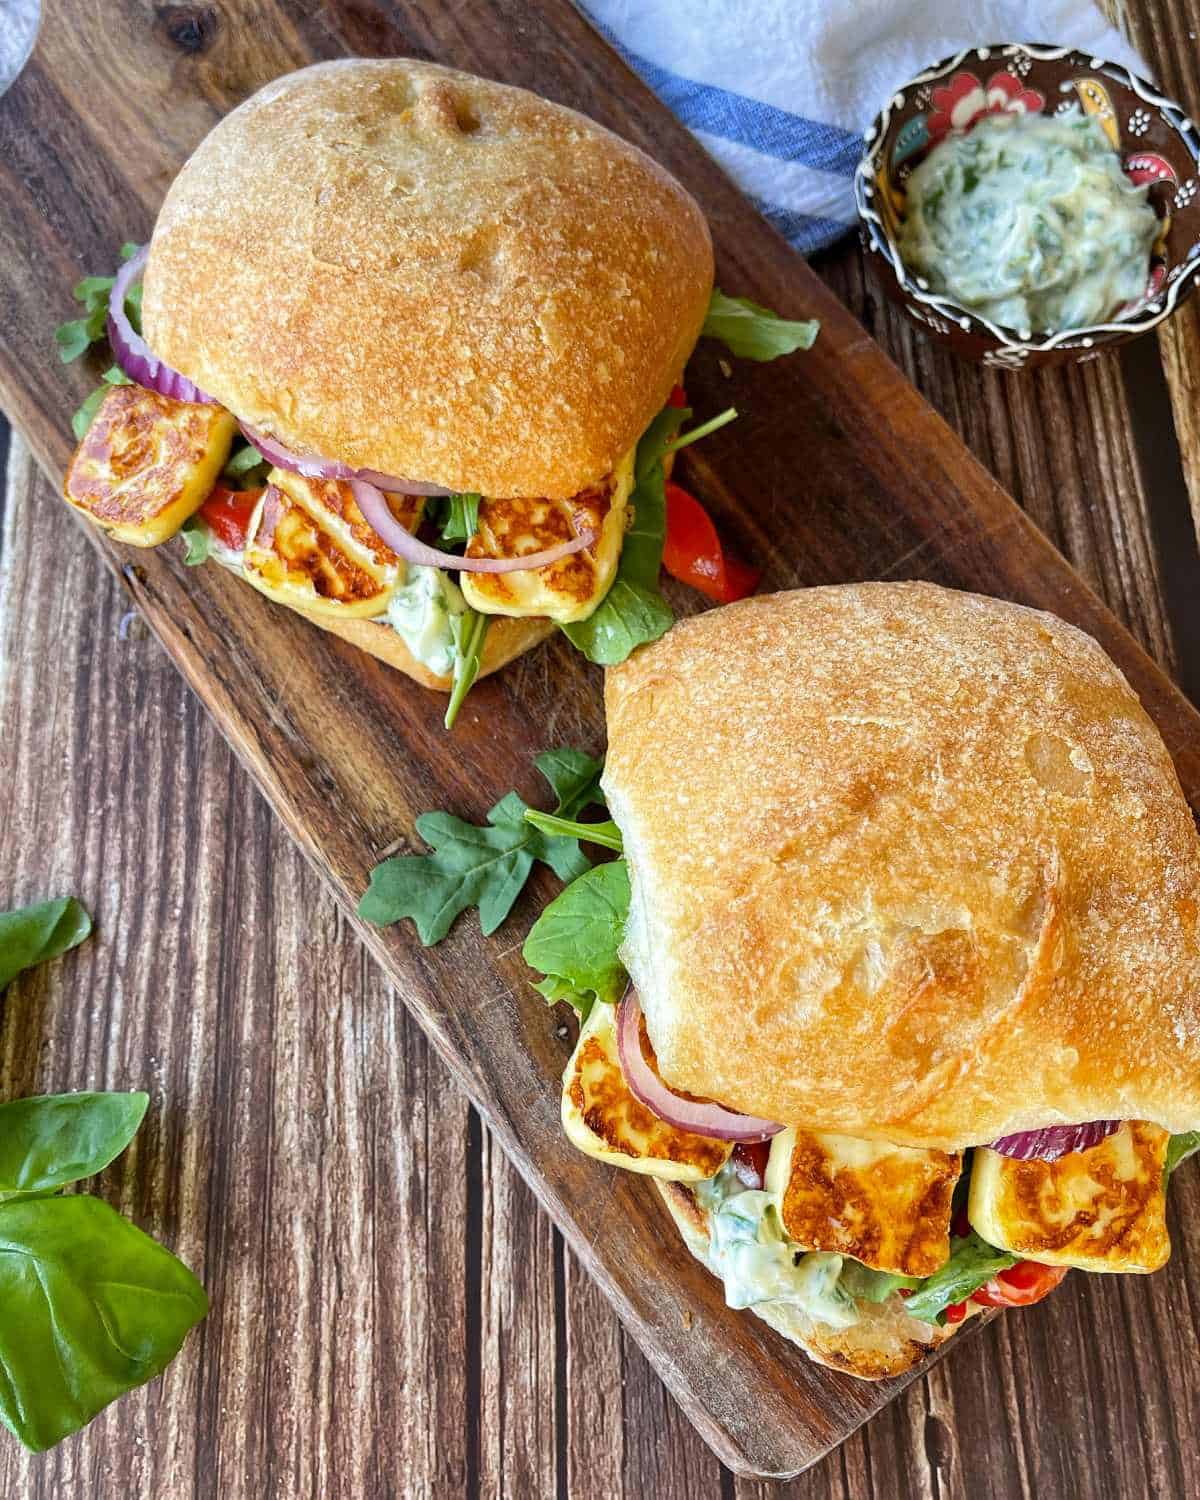 Two Halloumi Burger's on a wooden chopping board.